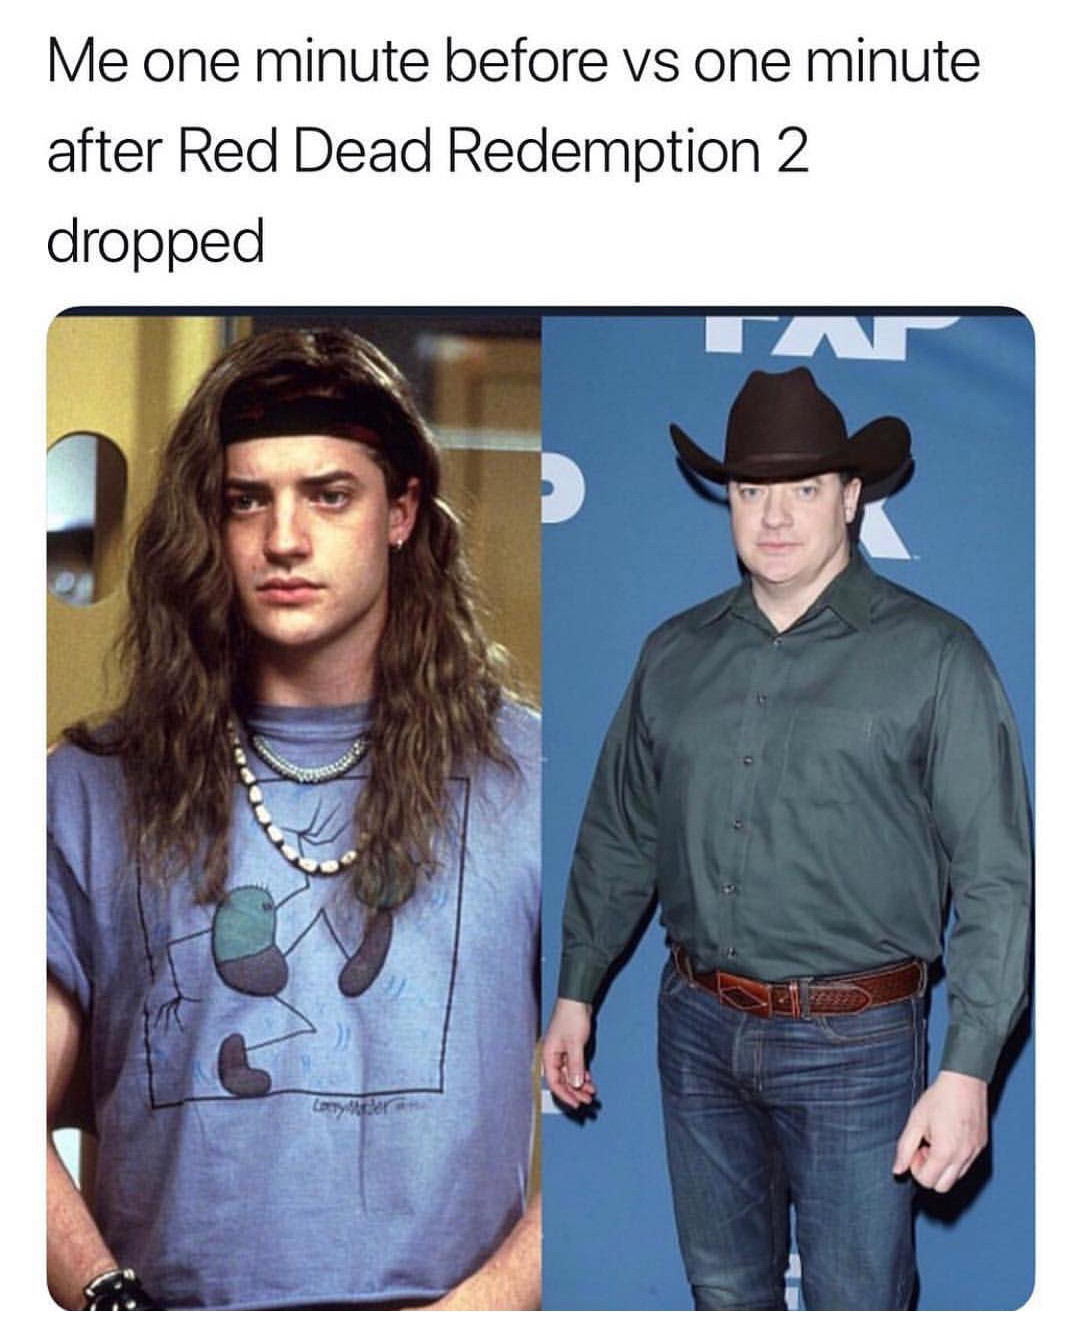 mark kozelek meme - Me one minute before vs one minute after Red Dead Redemption 2 dropped